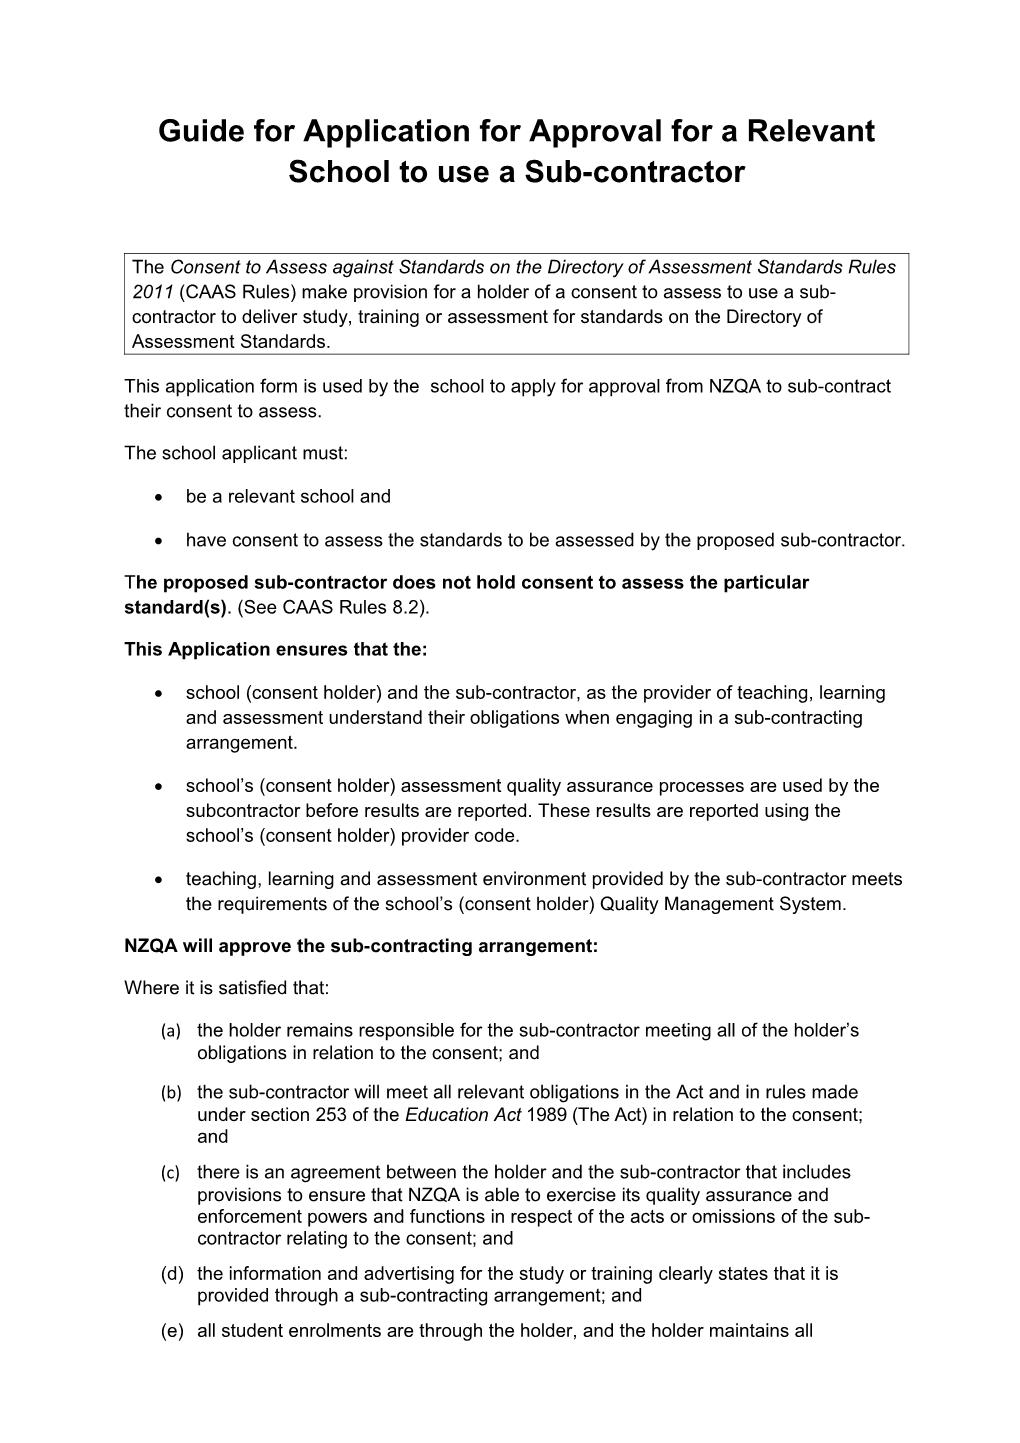 Guide for Application for Approval for a Relevant School to Use a Sub-Contractor